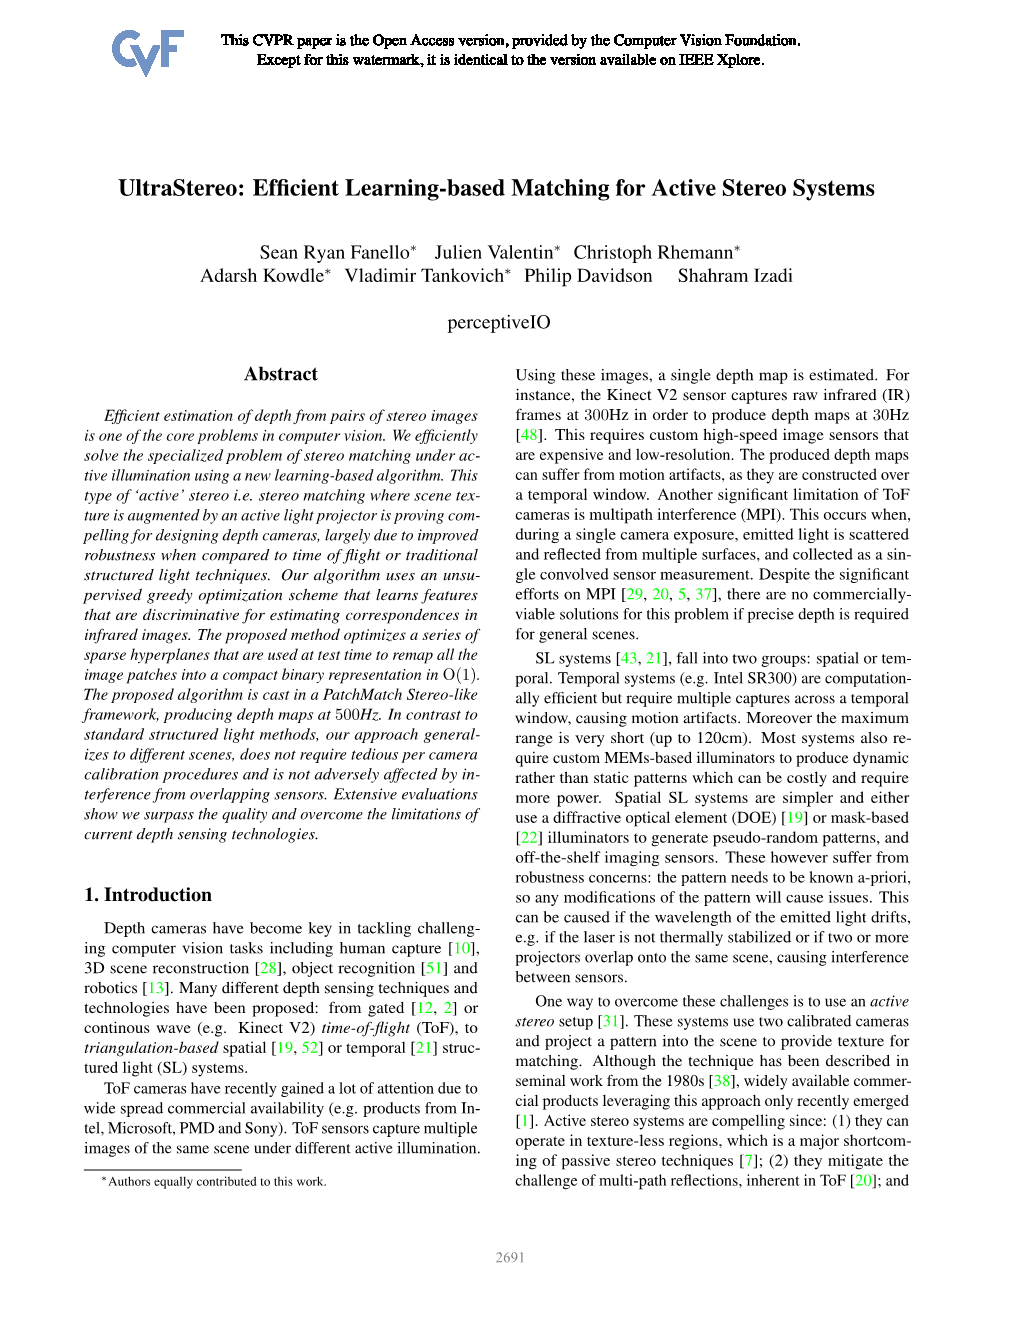 Efficient Learning-Based Matching for Active Stereo